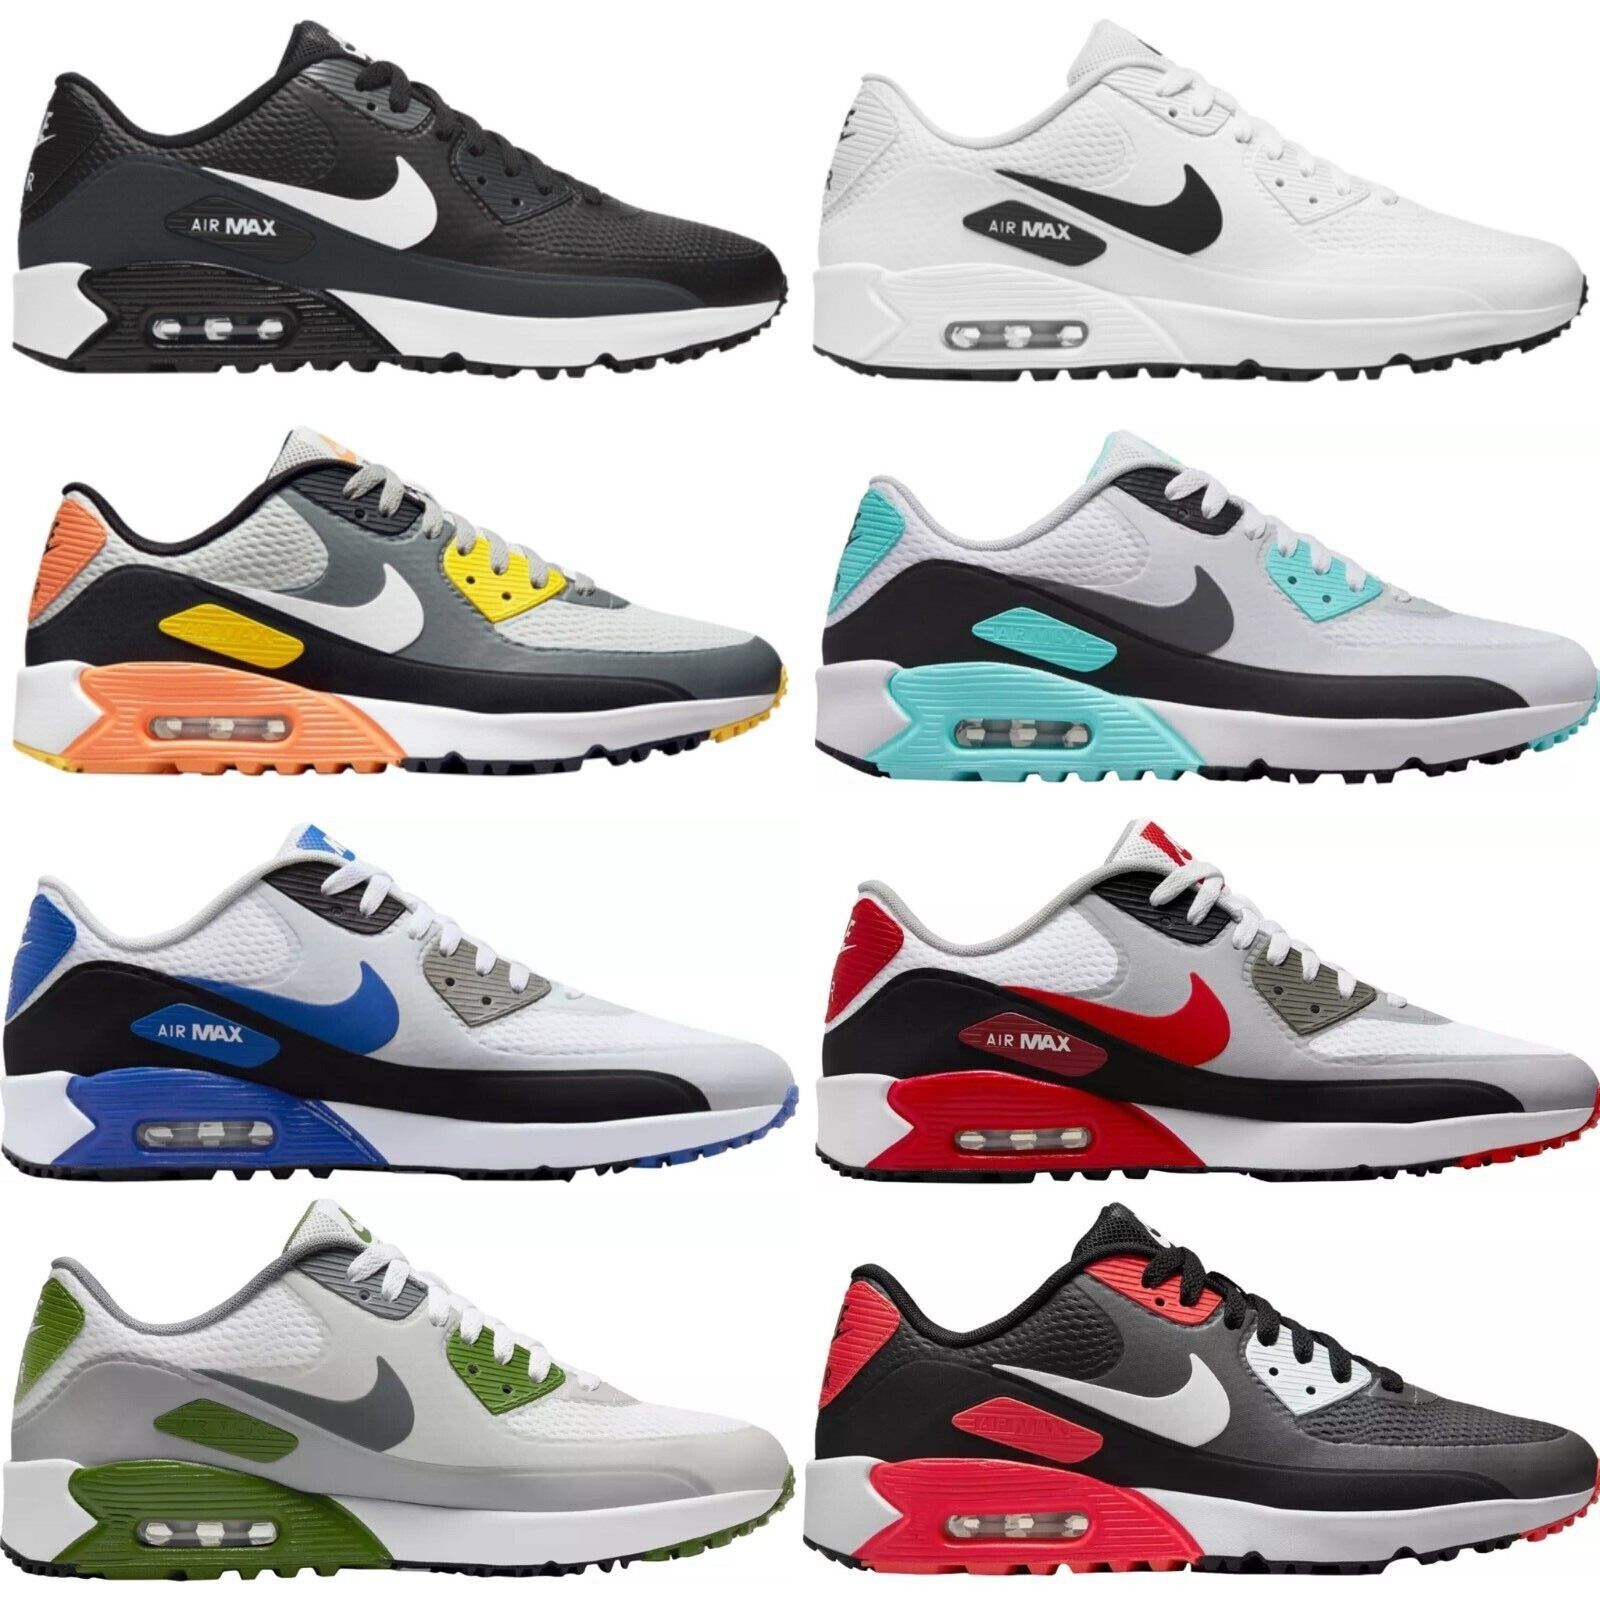 NEW Nike AIR MAX 90 G Men's GOLF Shoes ALL COLORS US Sizes 7-14 NEW IN BOX